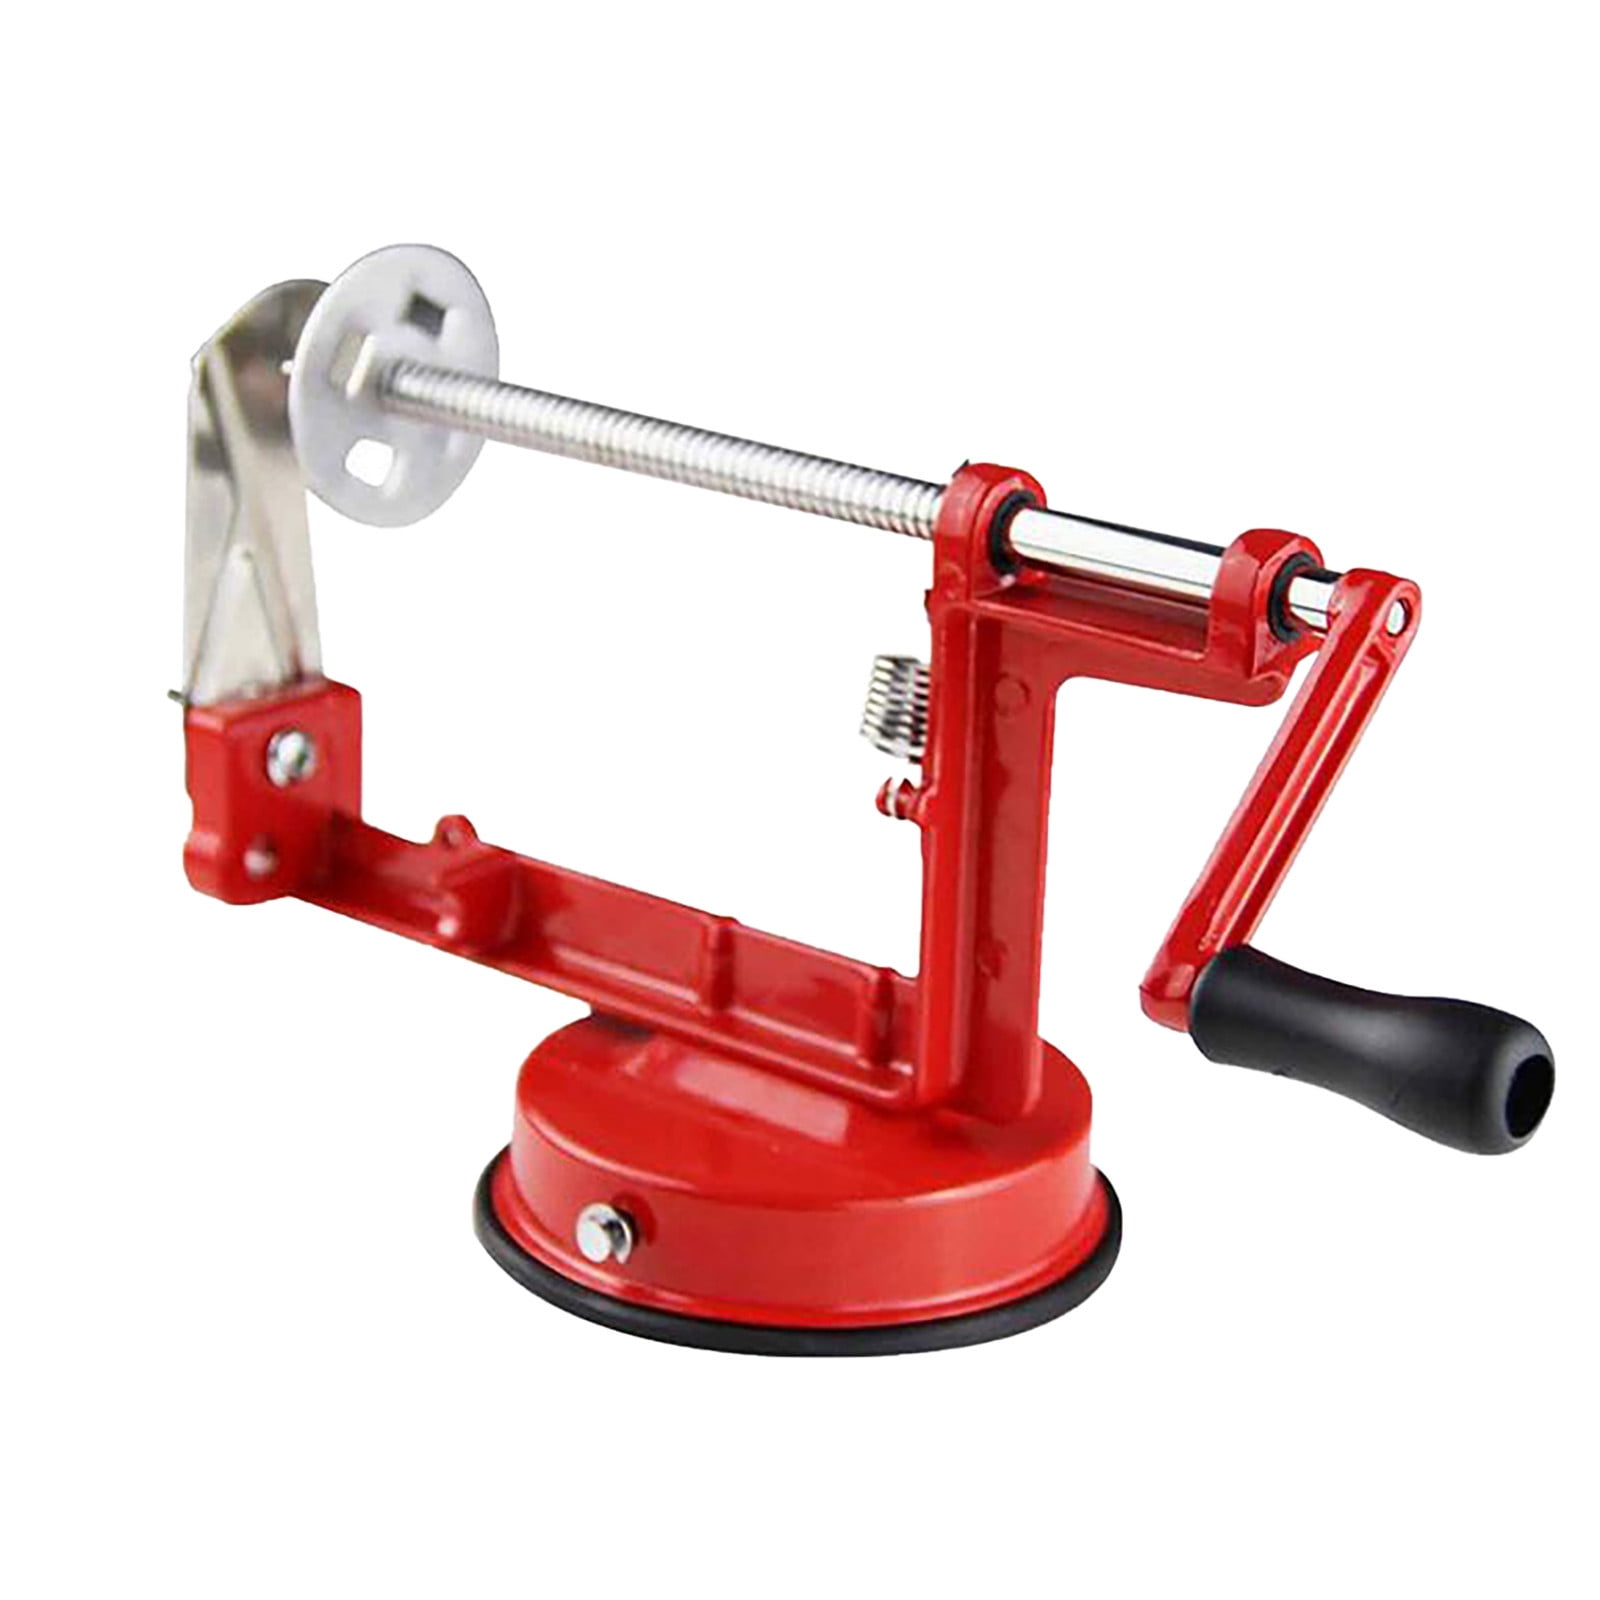 Brand: SpiralPro Type: Curly Fry Cutter Specs: Stainless Steel Blade, Wood  Handle Keywords: Vegetable Slicer, Pasta Maker Key Points: Precise Crinkle  Cuts, Easy To Use Features: Spiral Cutting Technology, Multipurpose Design  Scope